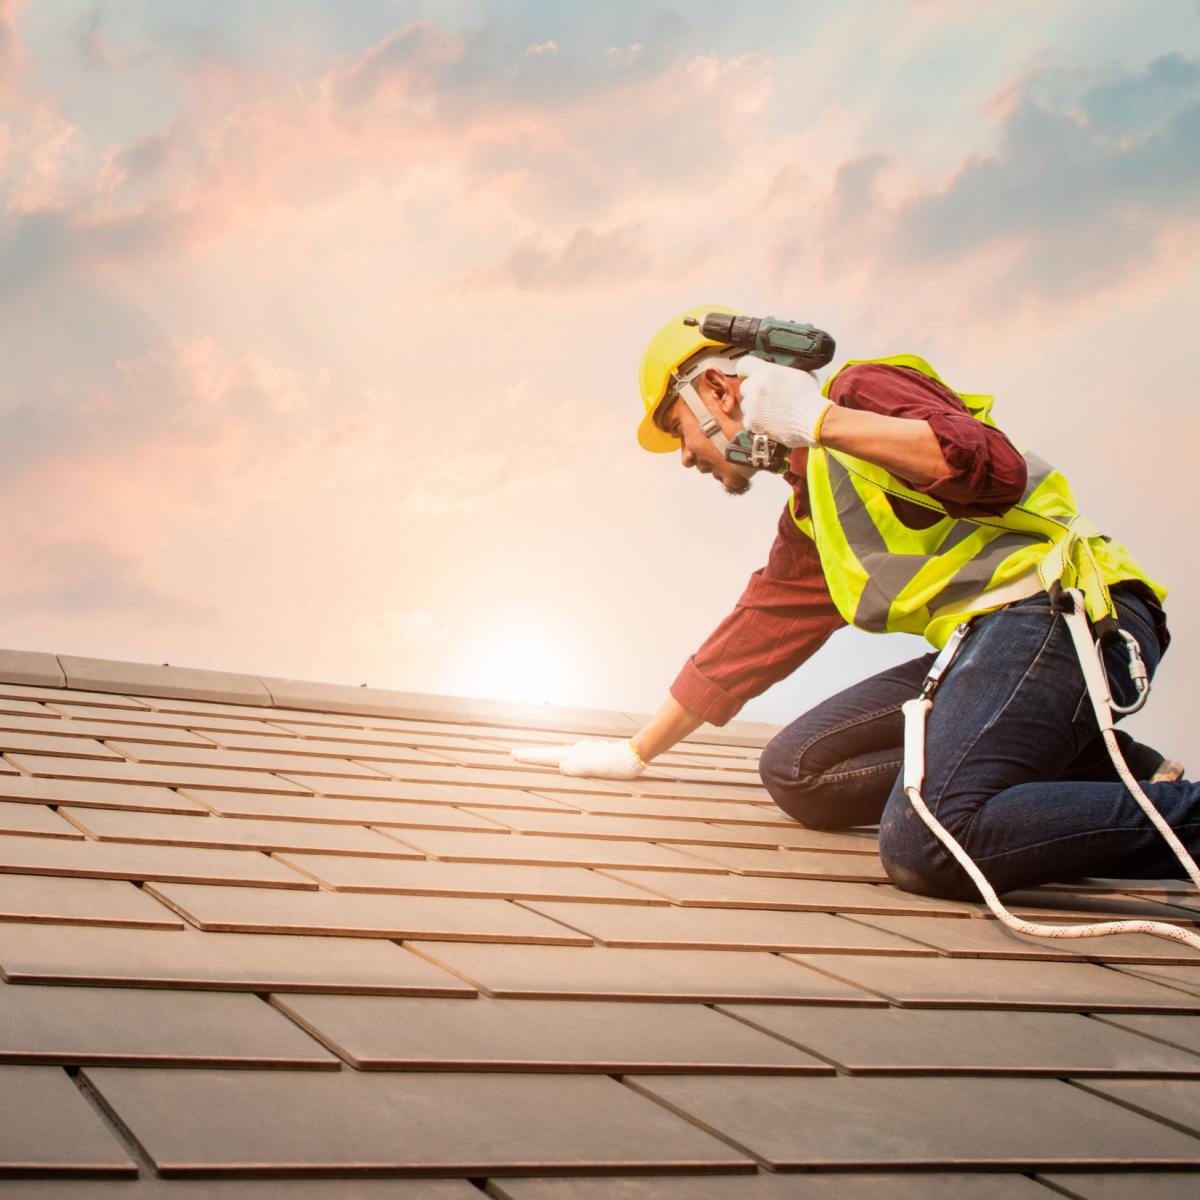 How Often Do You Need Piney Point Village Roof Repairs?